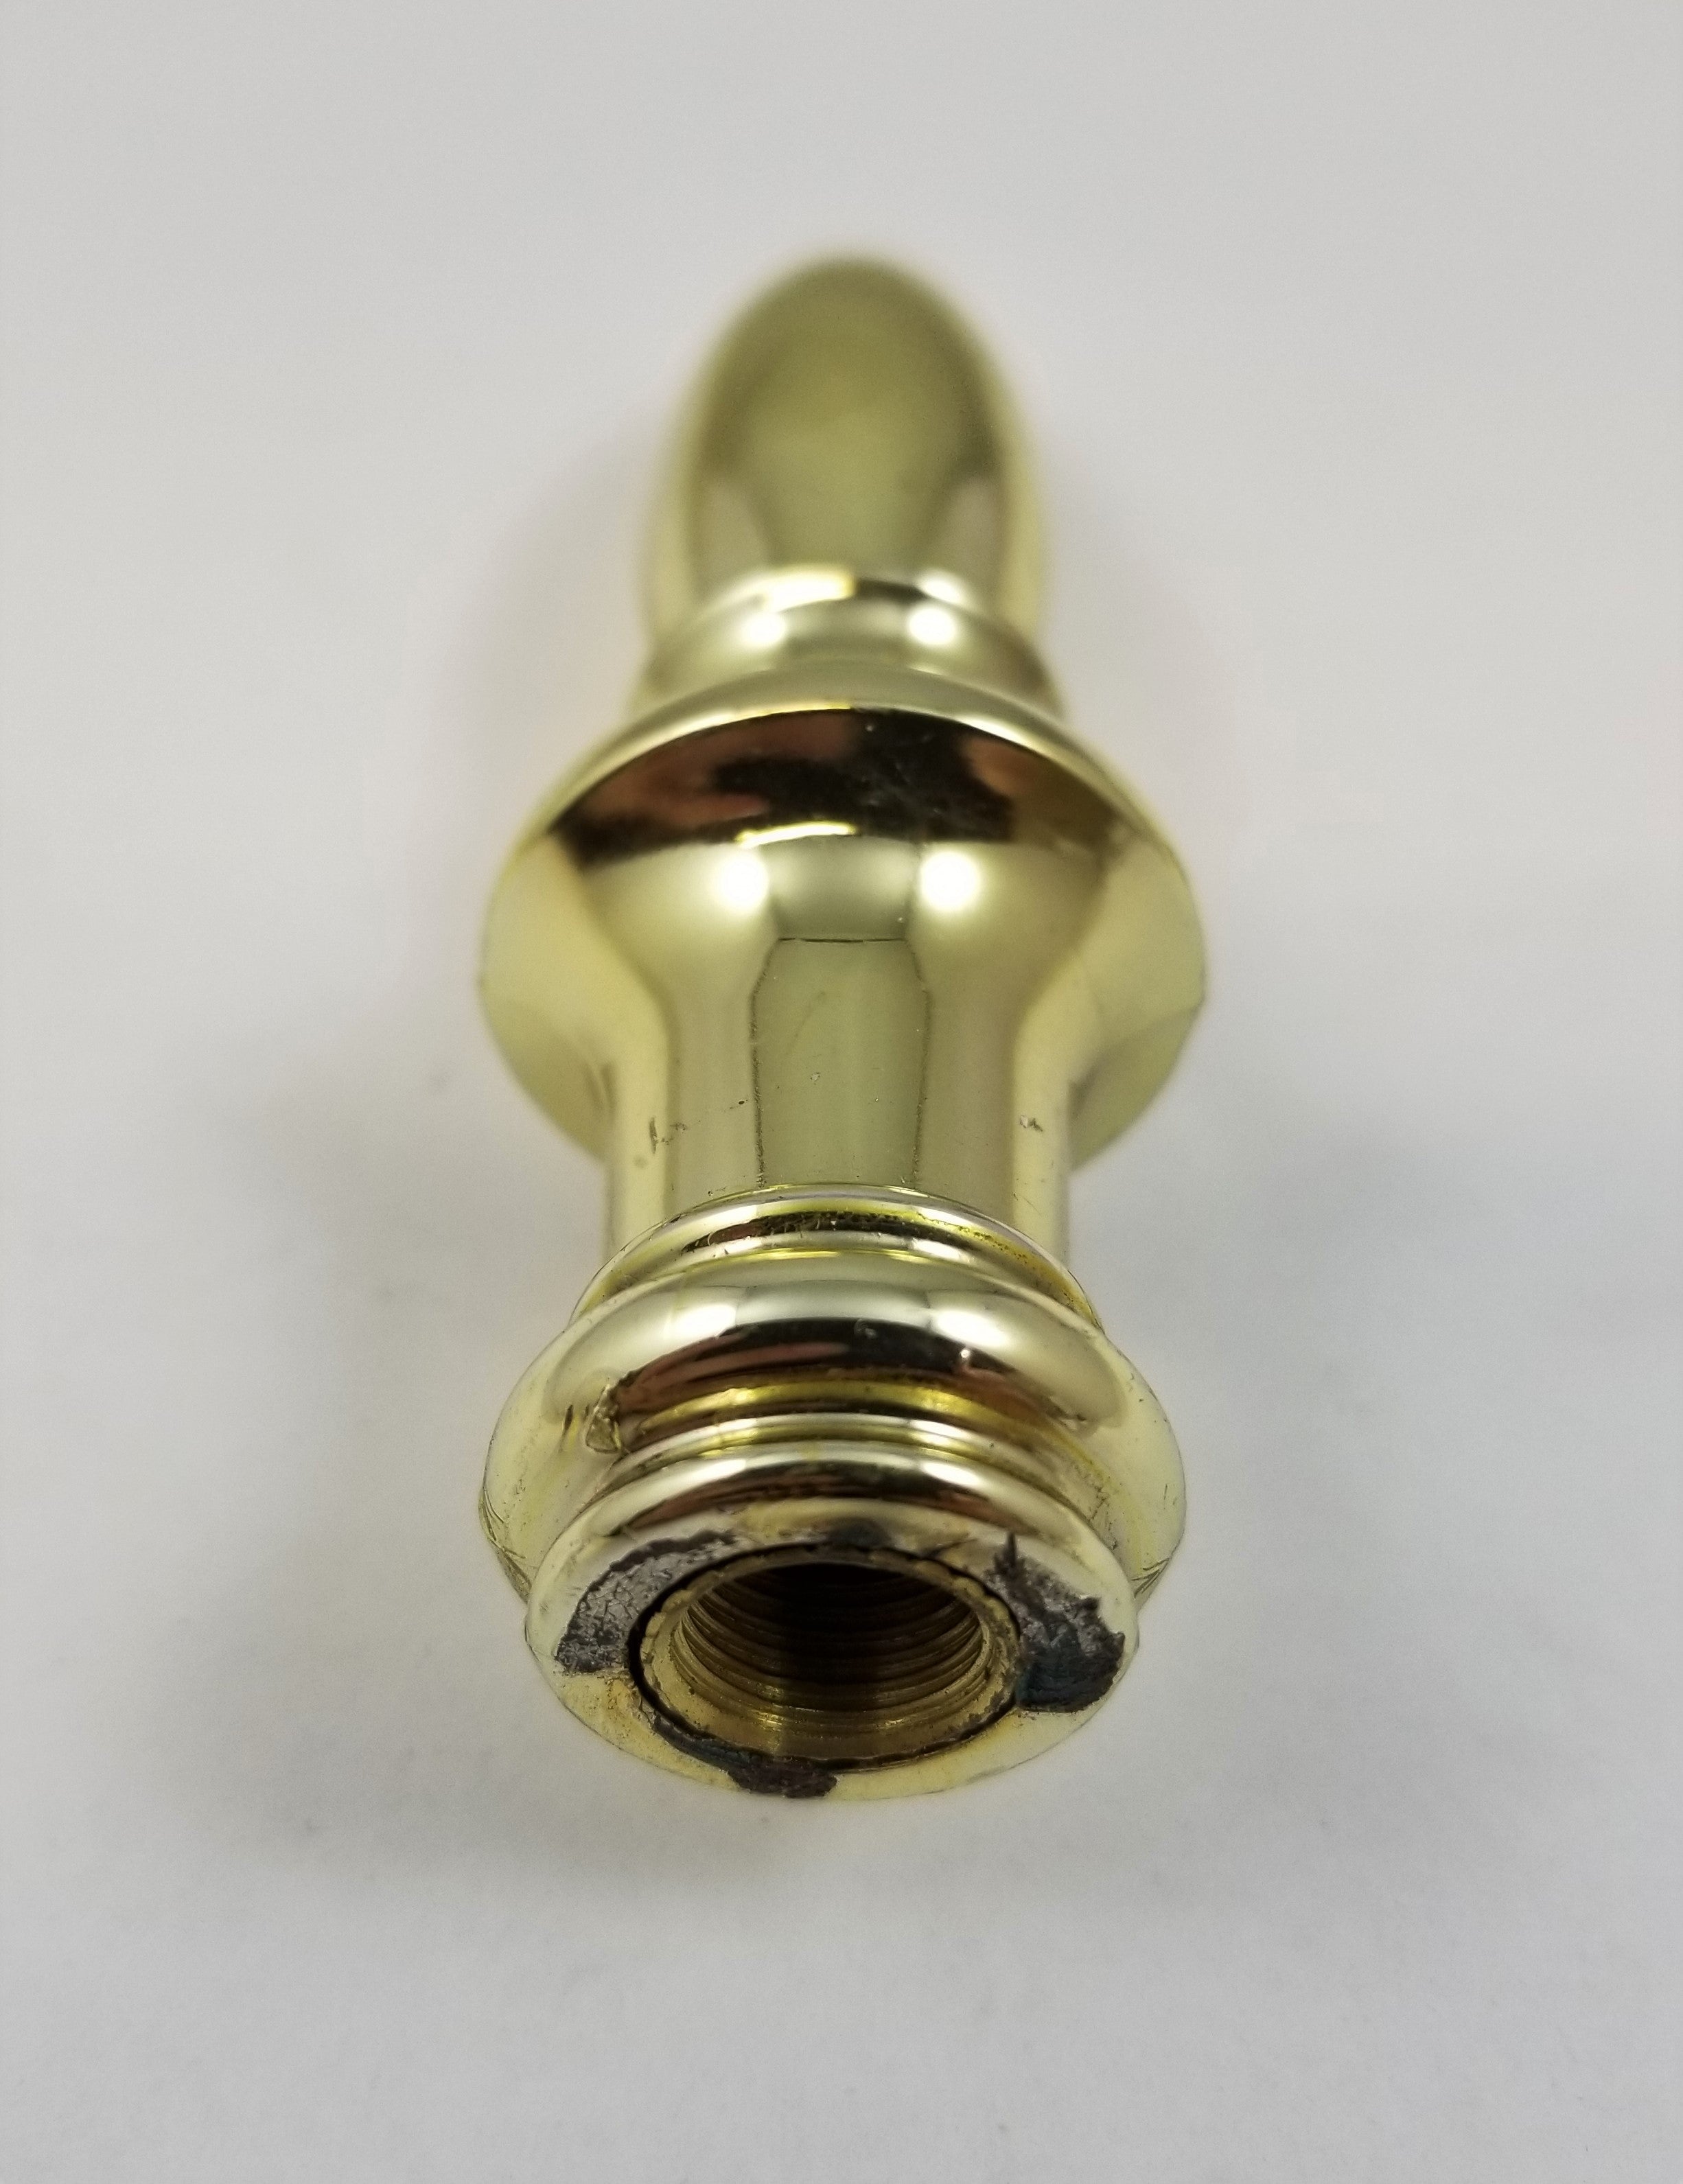 Plastic Finial in Brass - tapped 1/8 IP